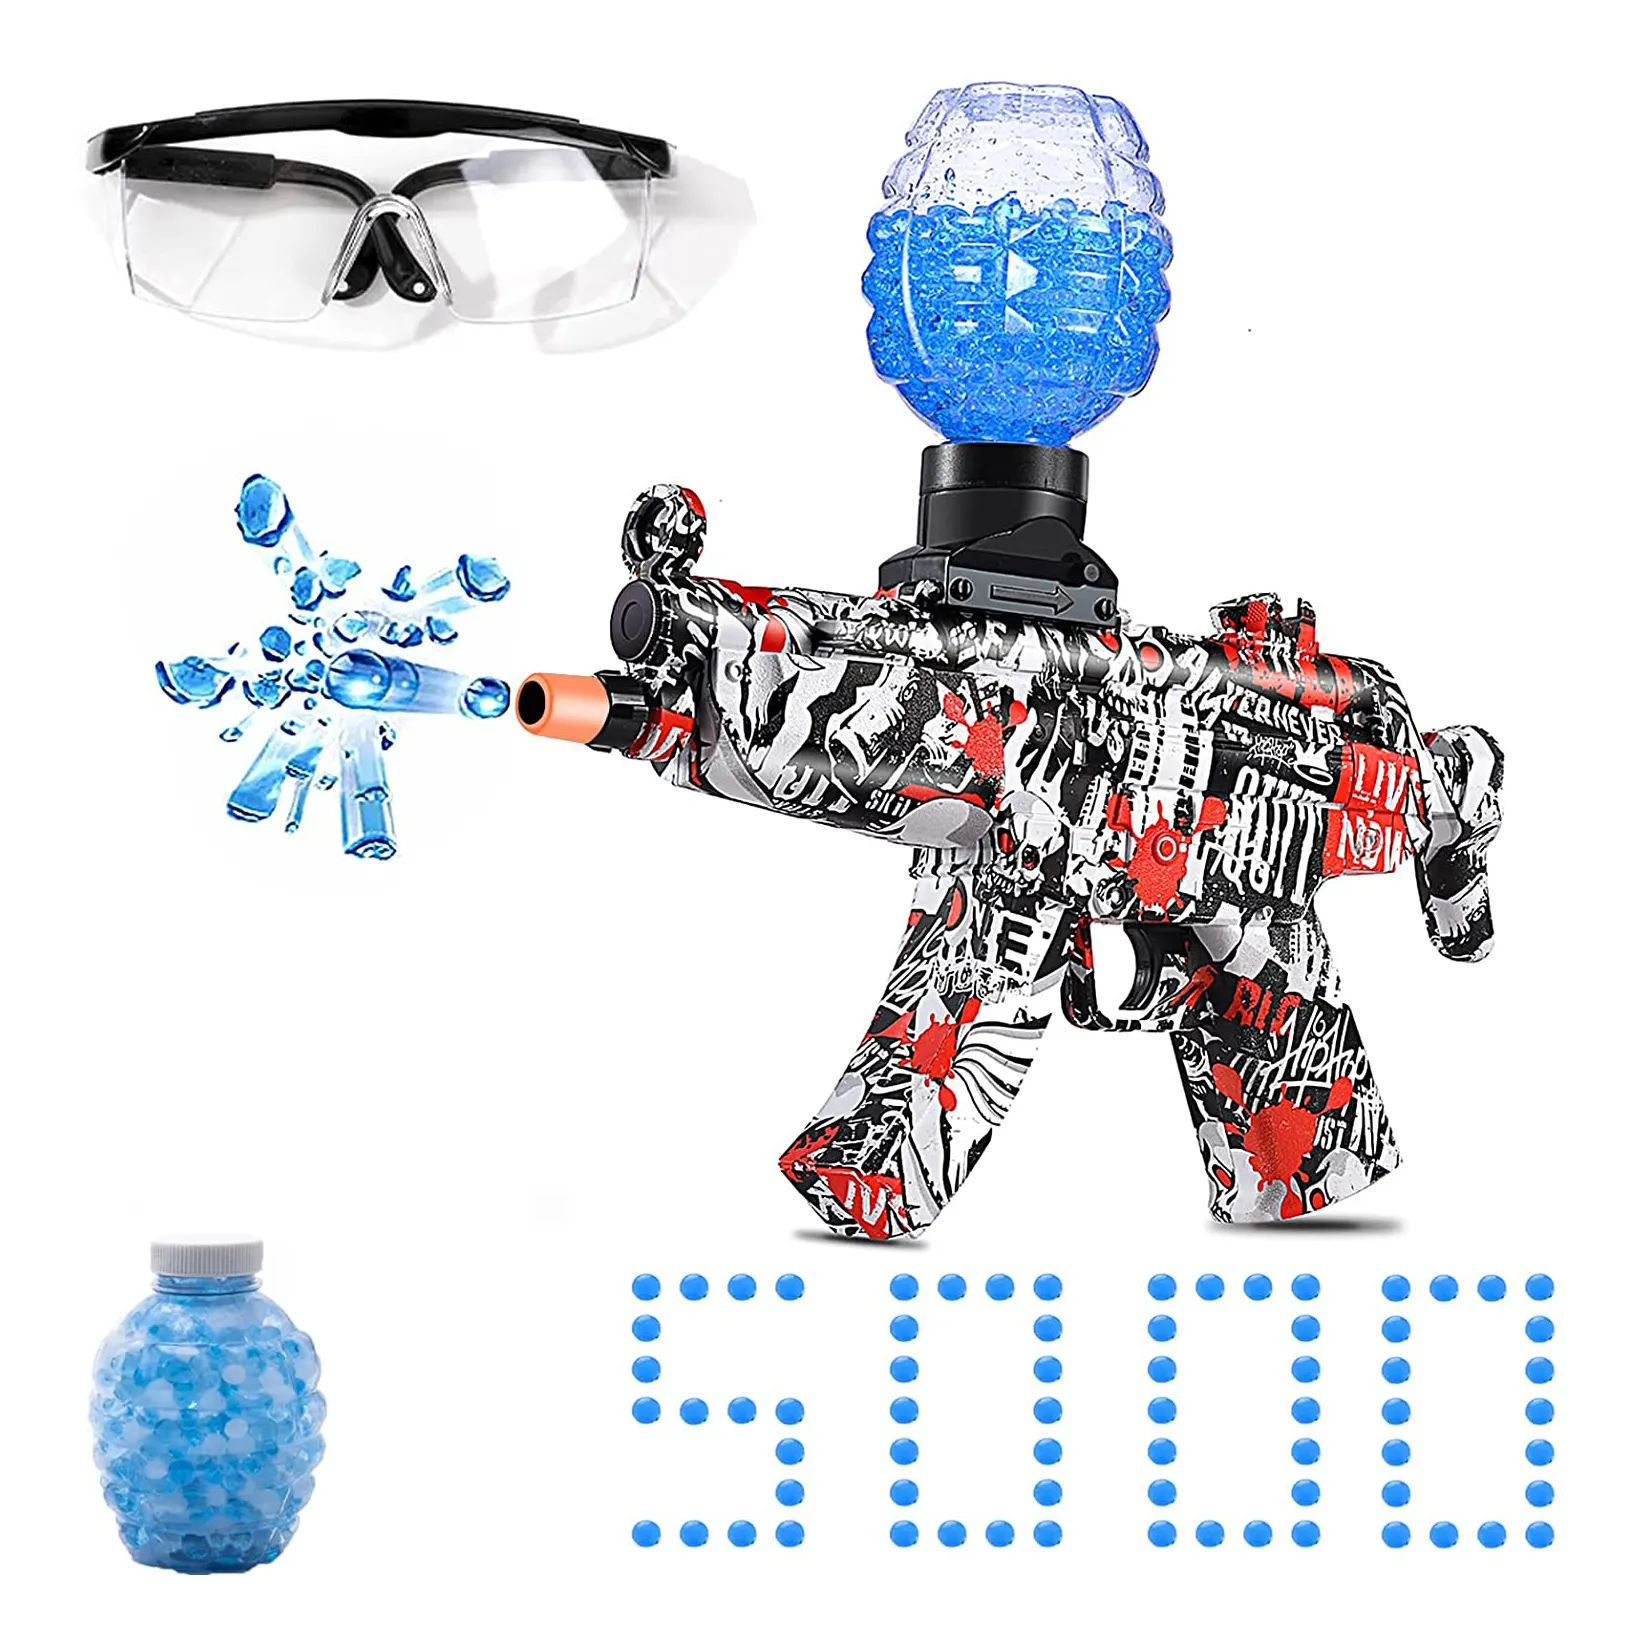 MP5 Electric Automatic Splatter Ball Gun with 5000 Water Beads Shooting Games Gel Ball Blaster for Kids Outdoor Sport